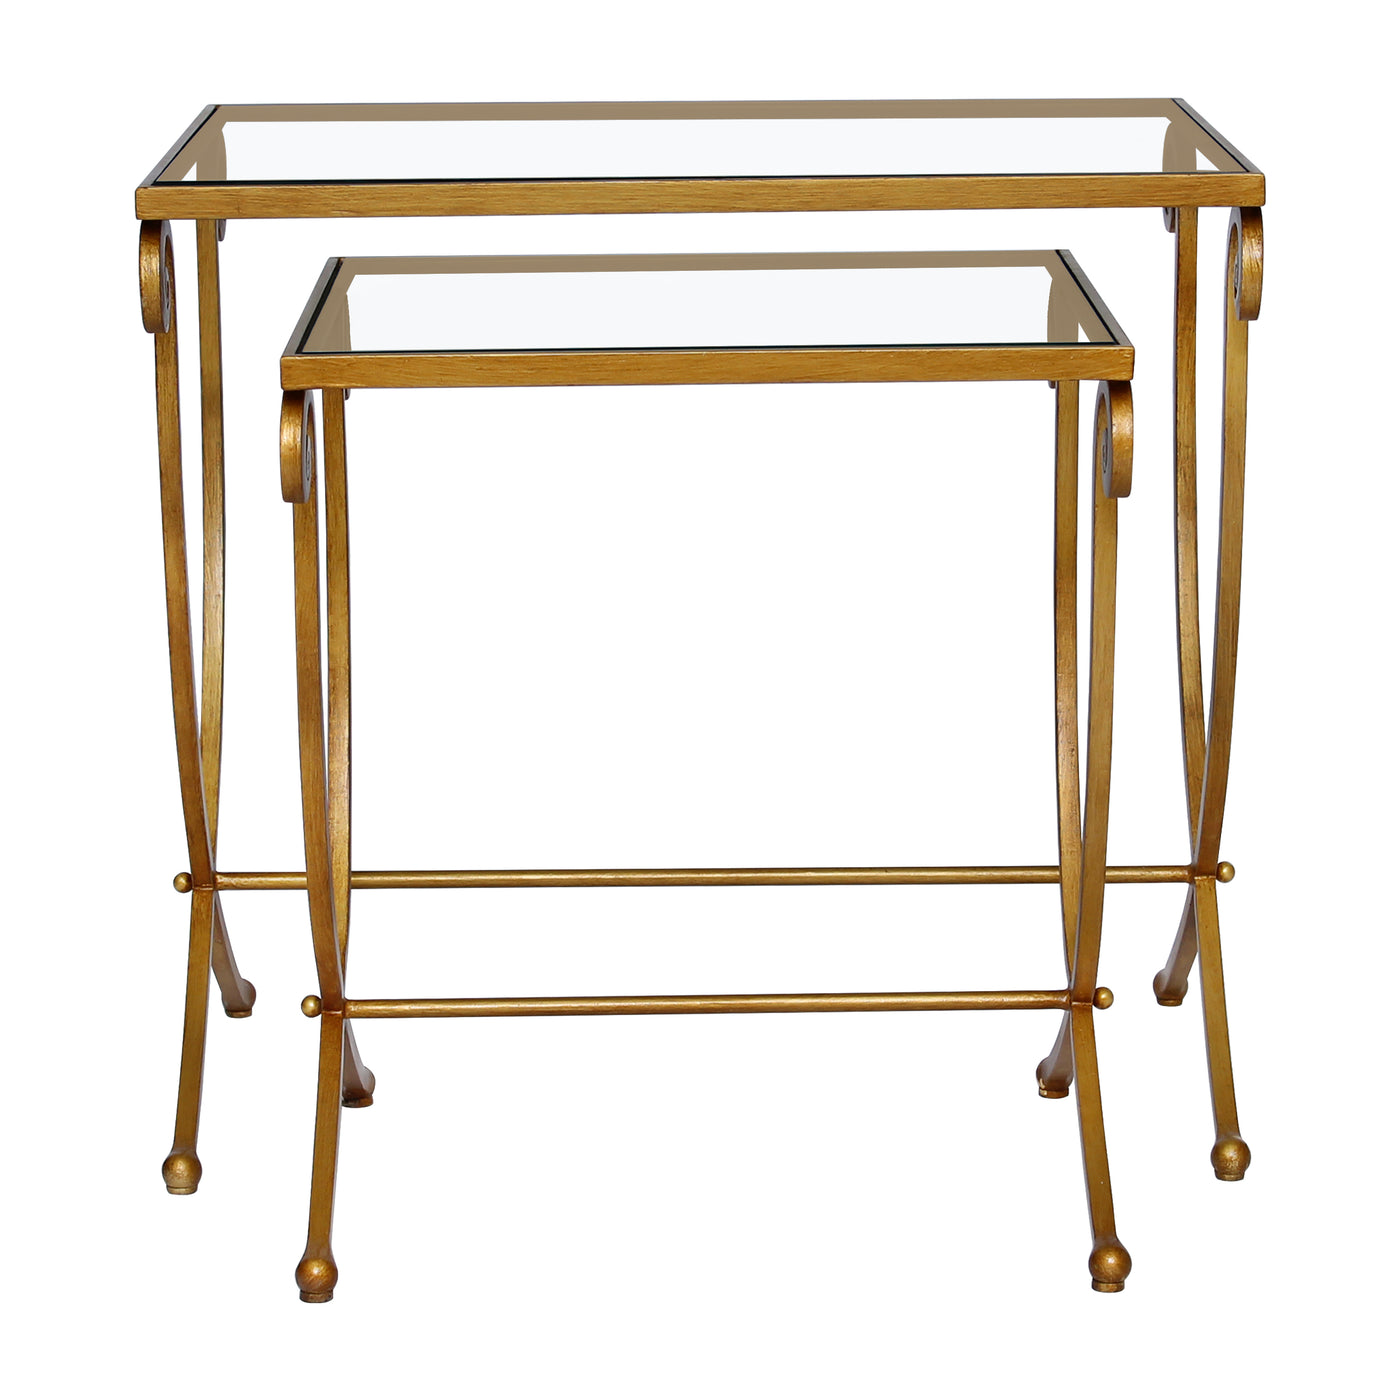 A set of two wrought iron nesting tables with long scrolled legs painted in antique gold and topped with glass